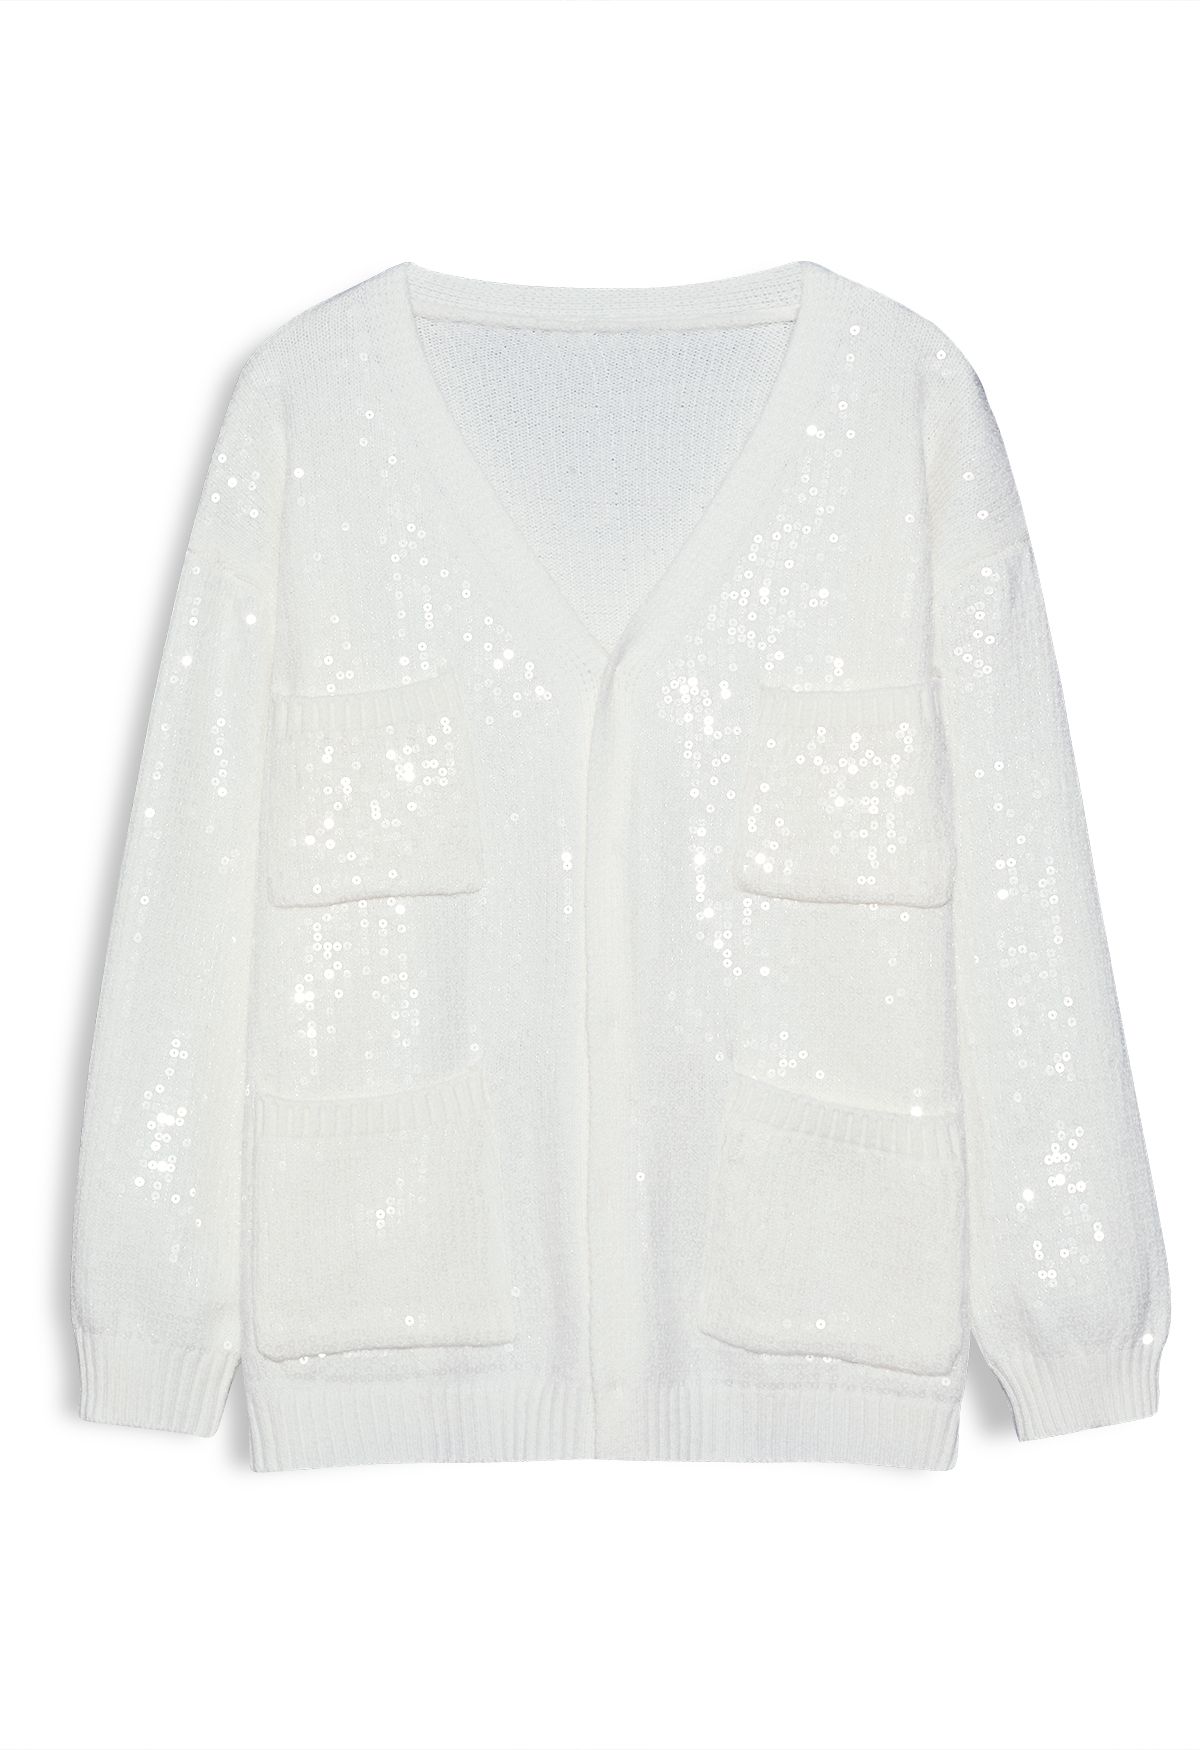 Sequins Cover Patch Pocket Knit Cardigan